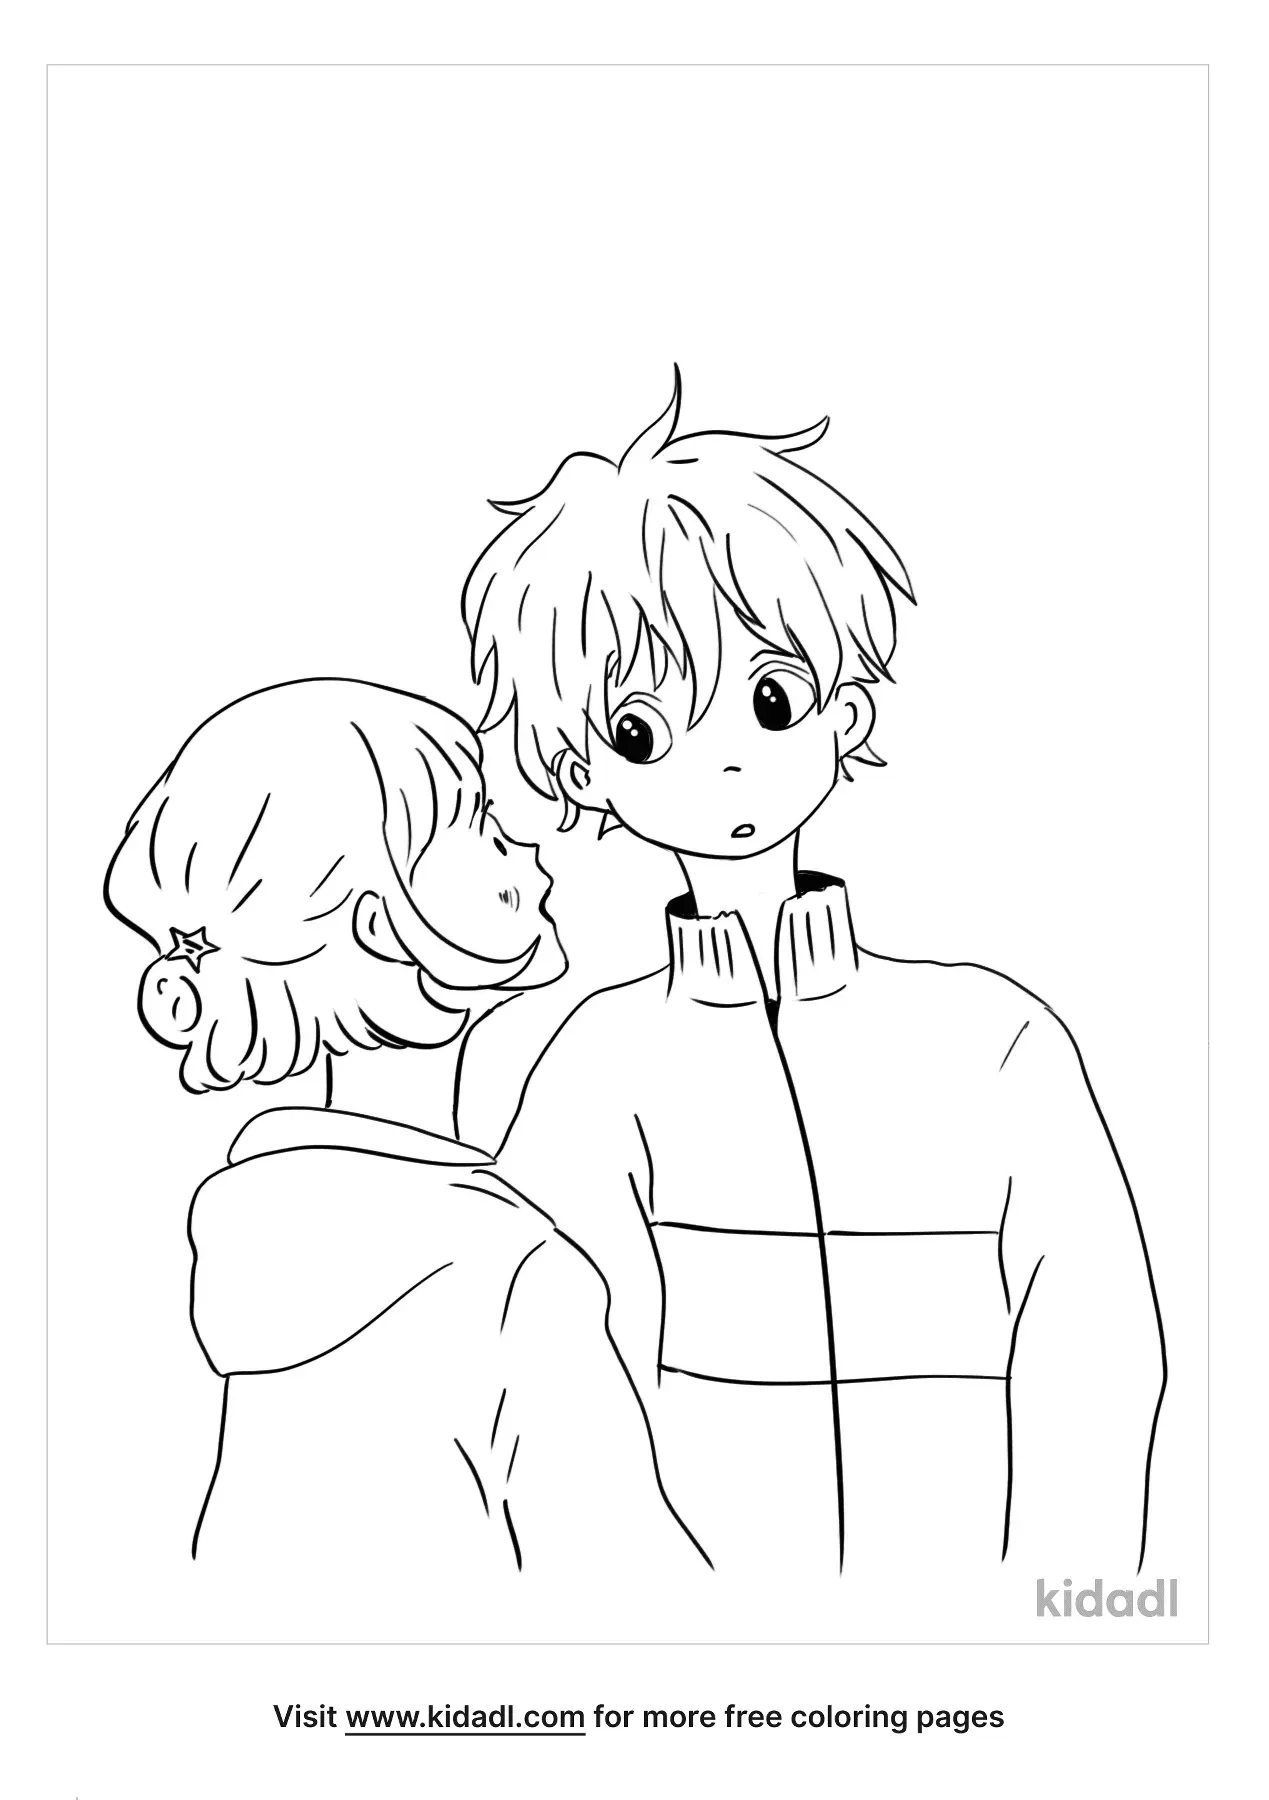 Anime Couple Coloring Page  Free Printable Coloring Pages for Kids